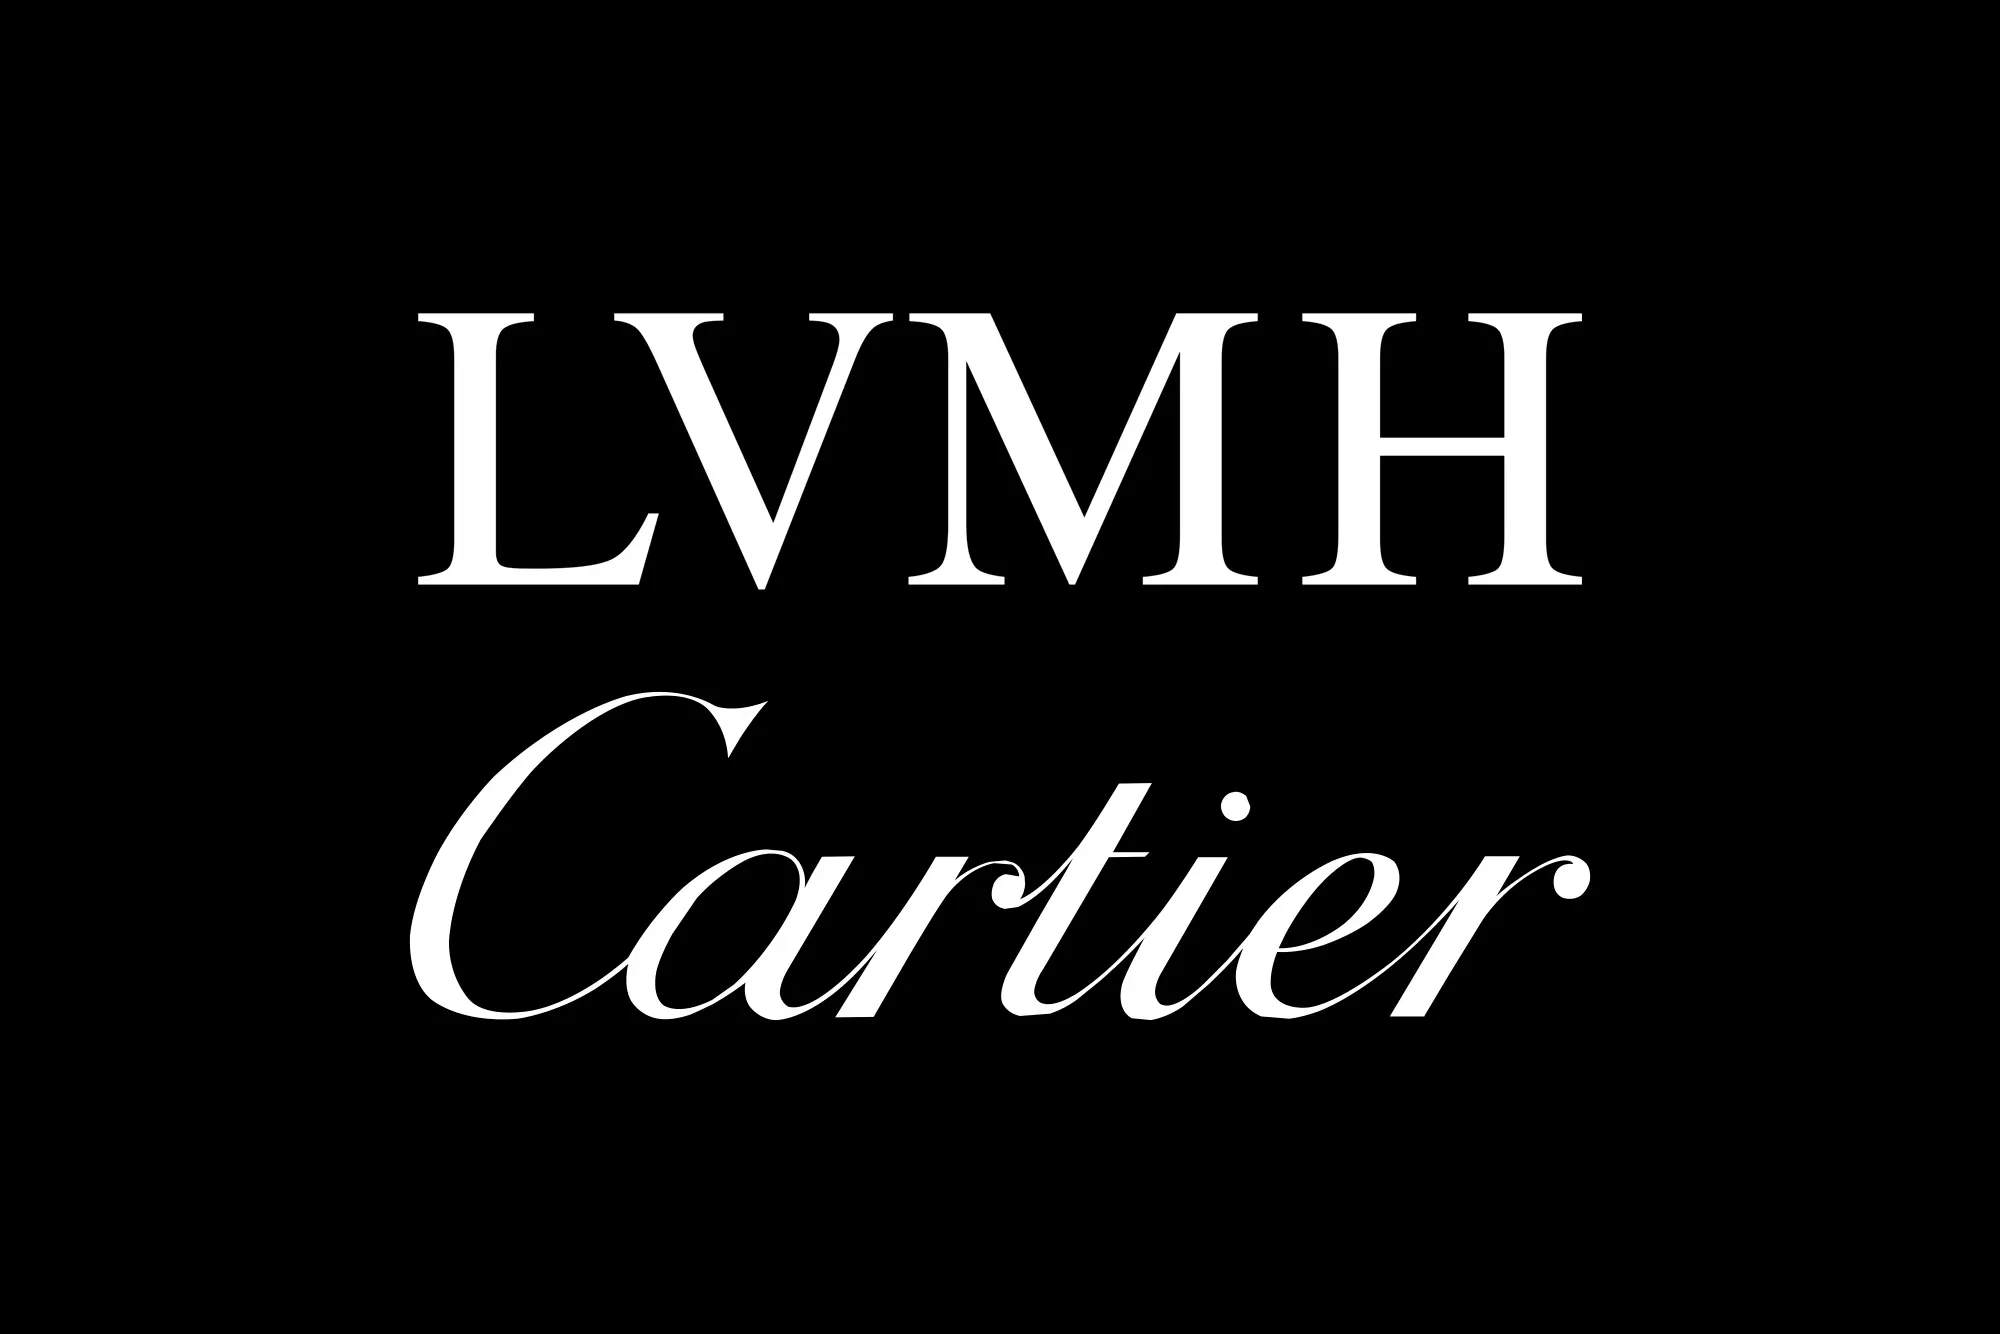 highsnobiety on X: LVMH is acquiring Cartier. That's if internet rumors  are to be believed.⁠ While nothing concrete has surfaced yet, the shoe  certainly does fit.  / X